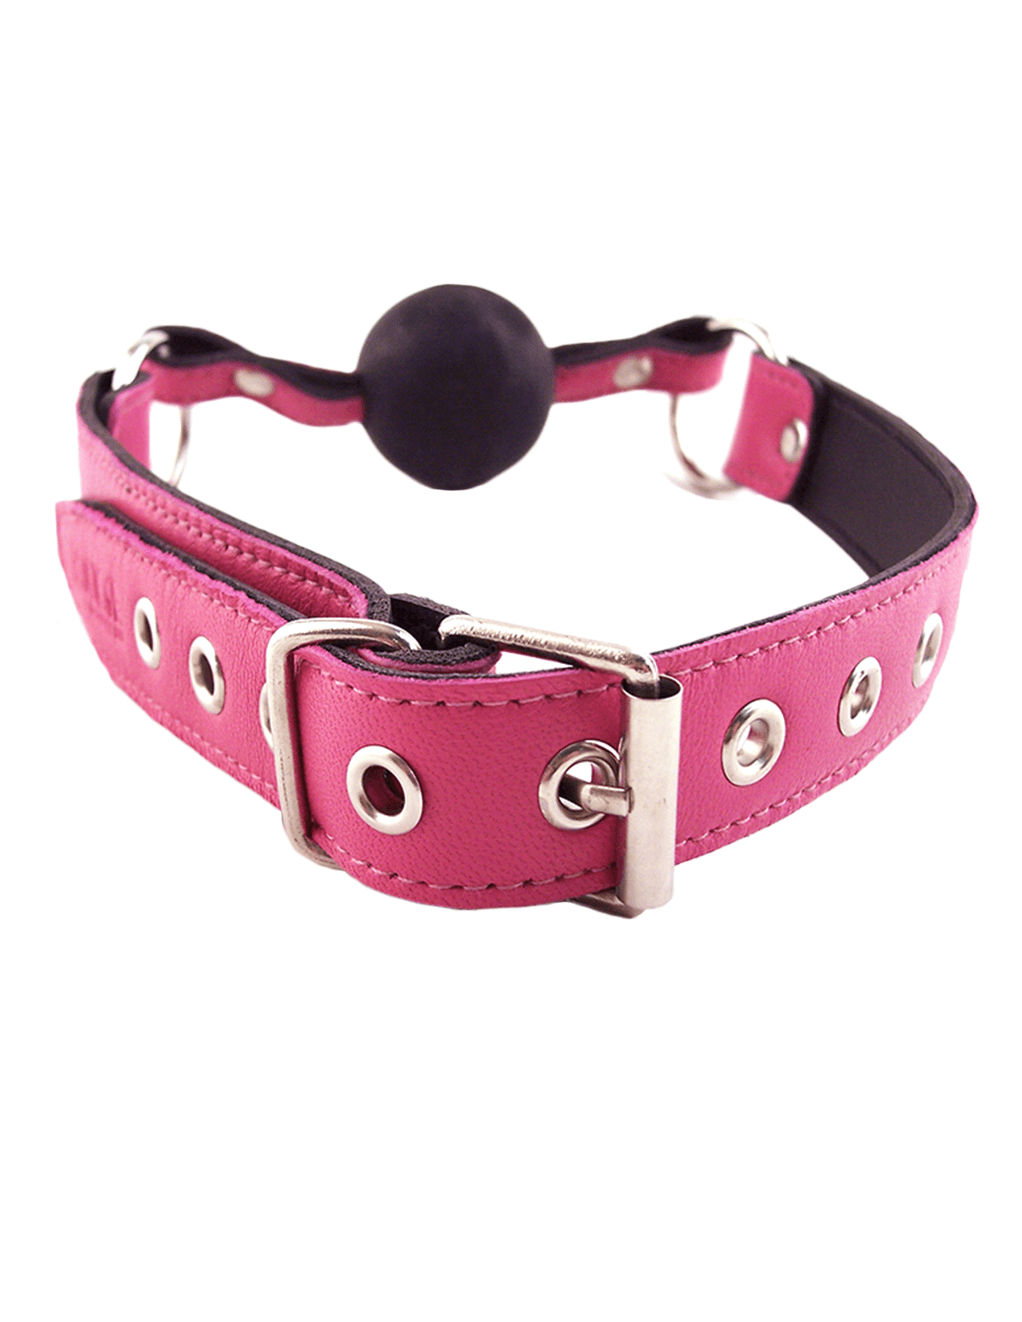 Rouge Leather & Rubber Ball Gag - Pink/Black - Back